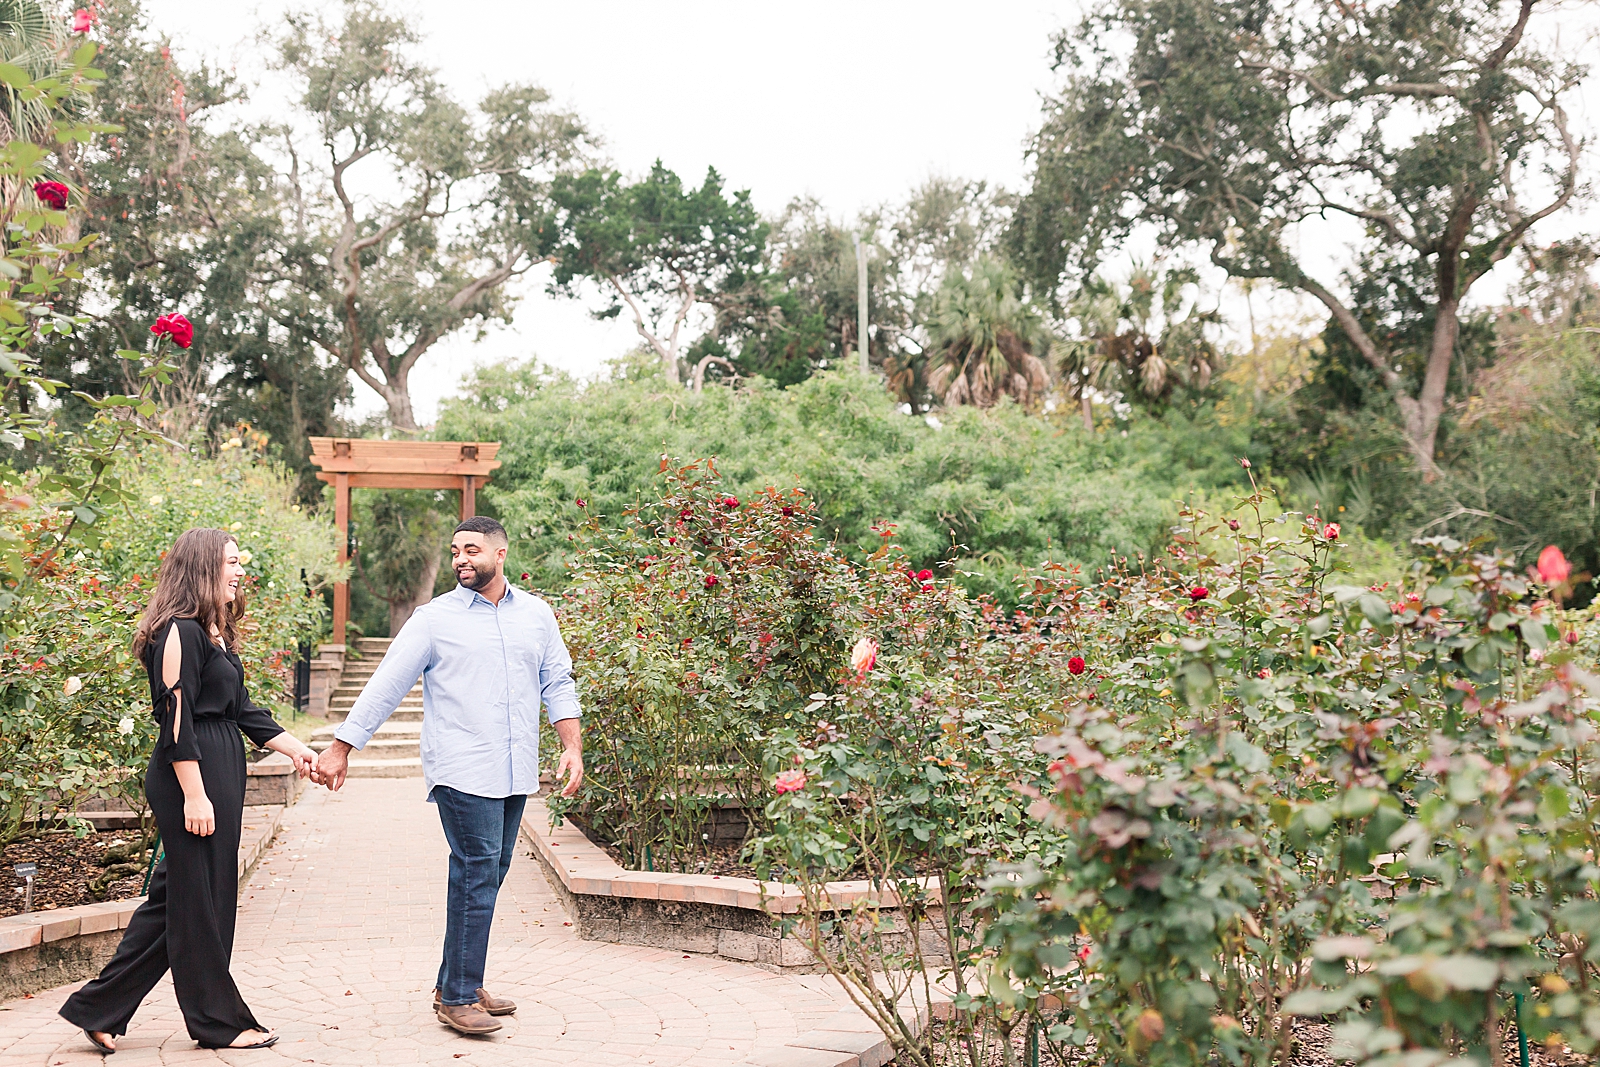 St. Augustine Engagement Nick and Chloe holding hands walking through rose garden Photo